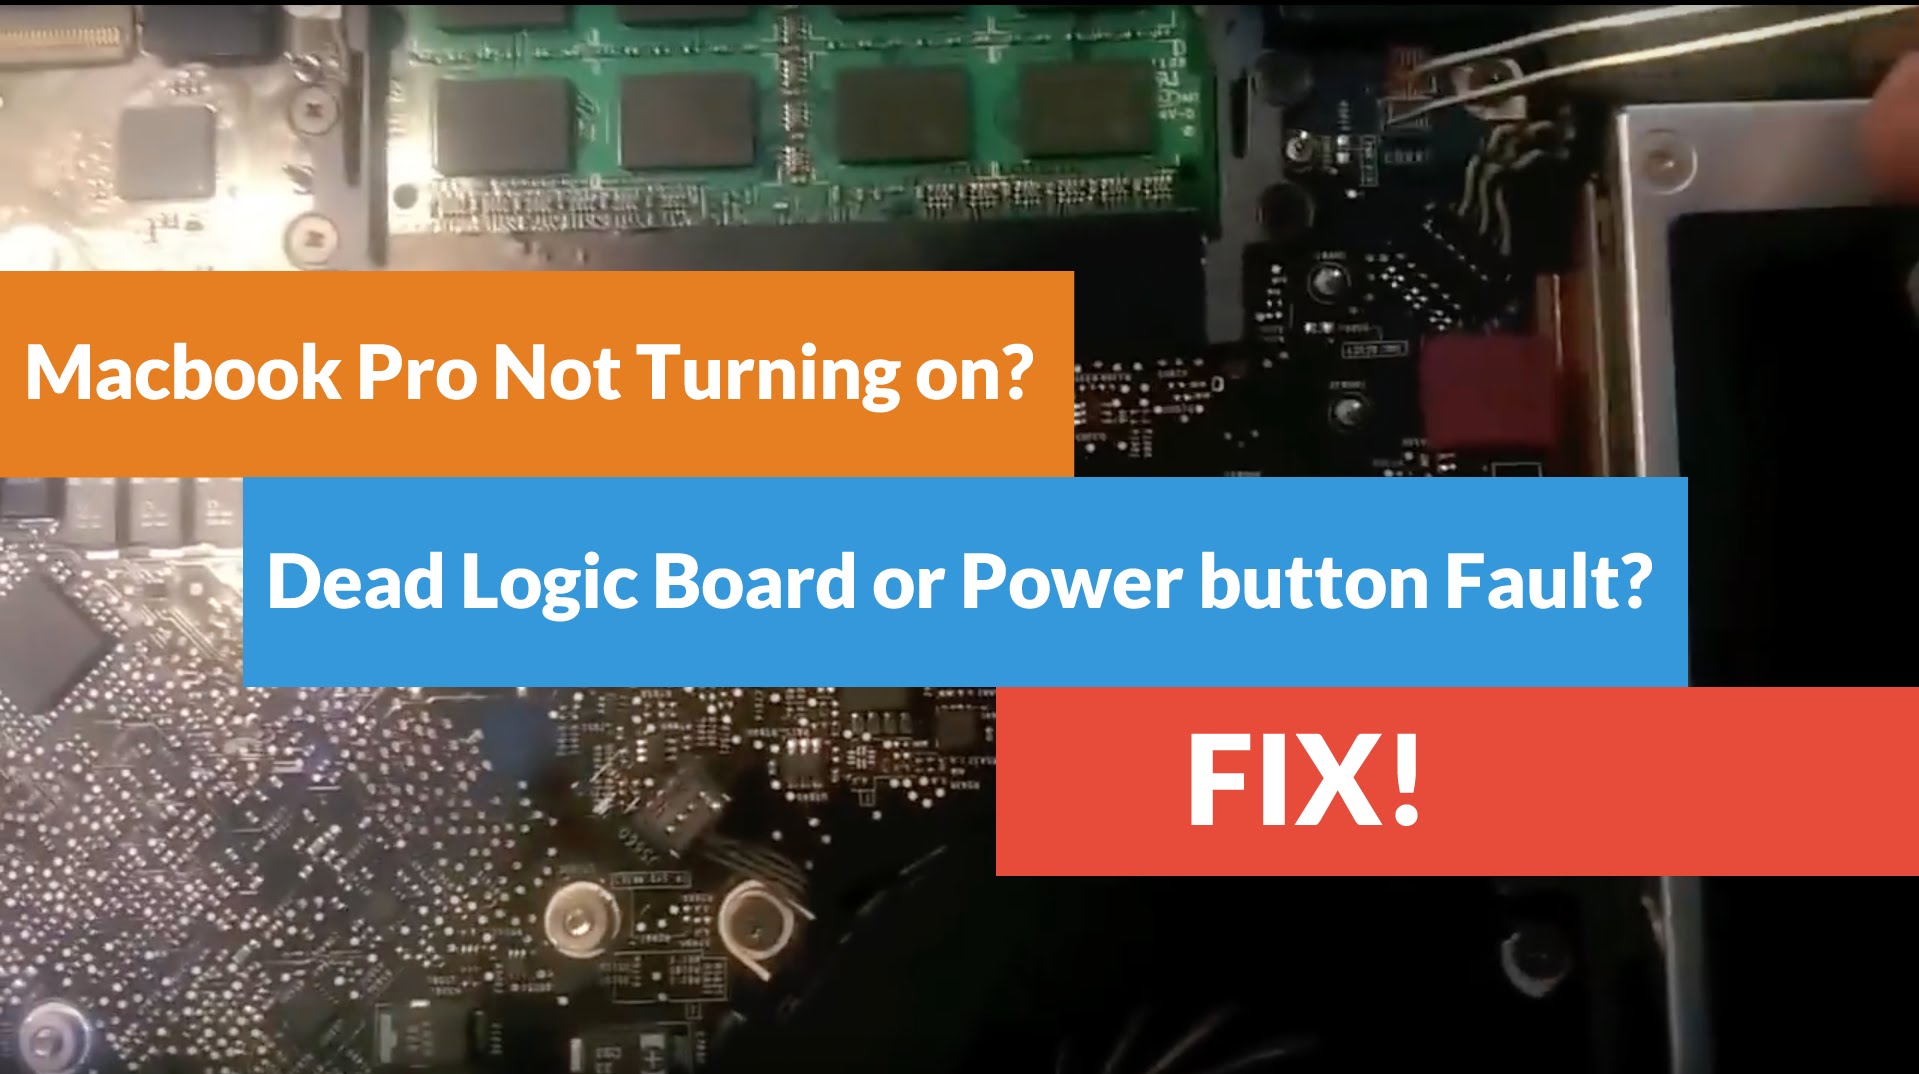 Mac book Pro Not turning on! Dead Logic Board or Power Button Fault ...